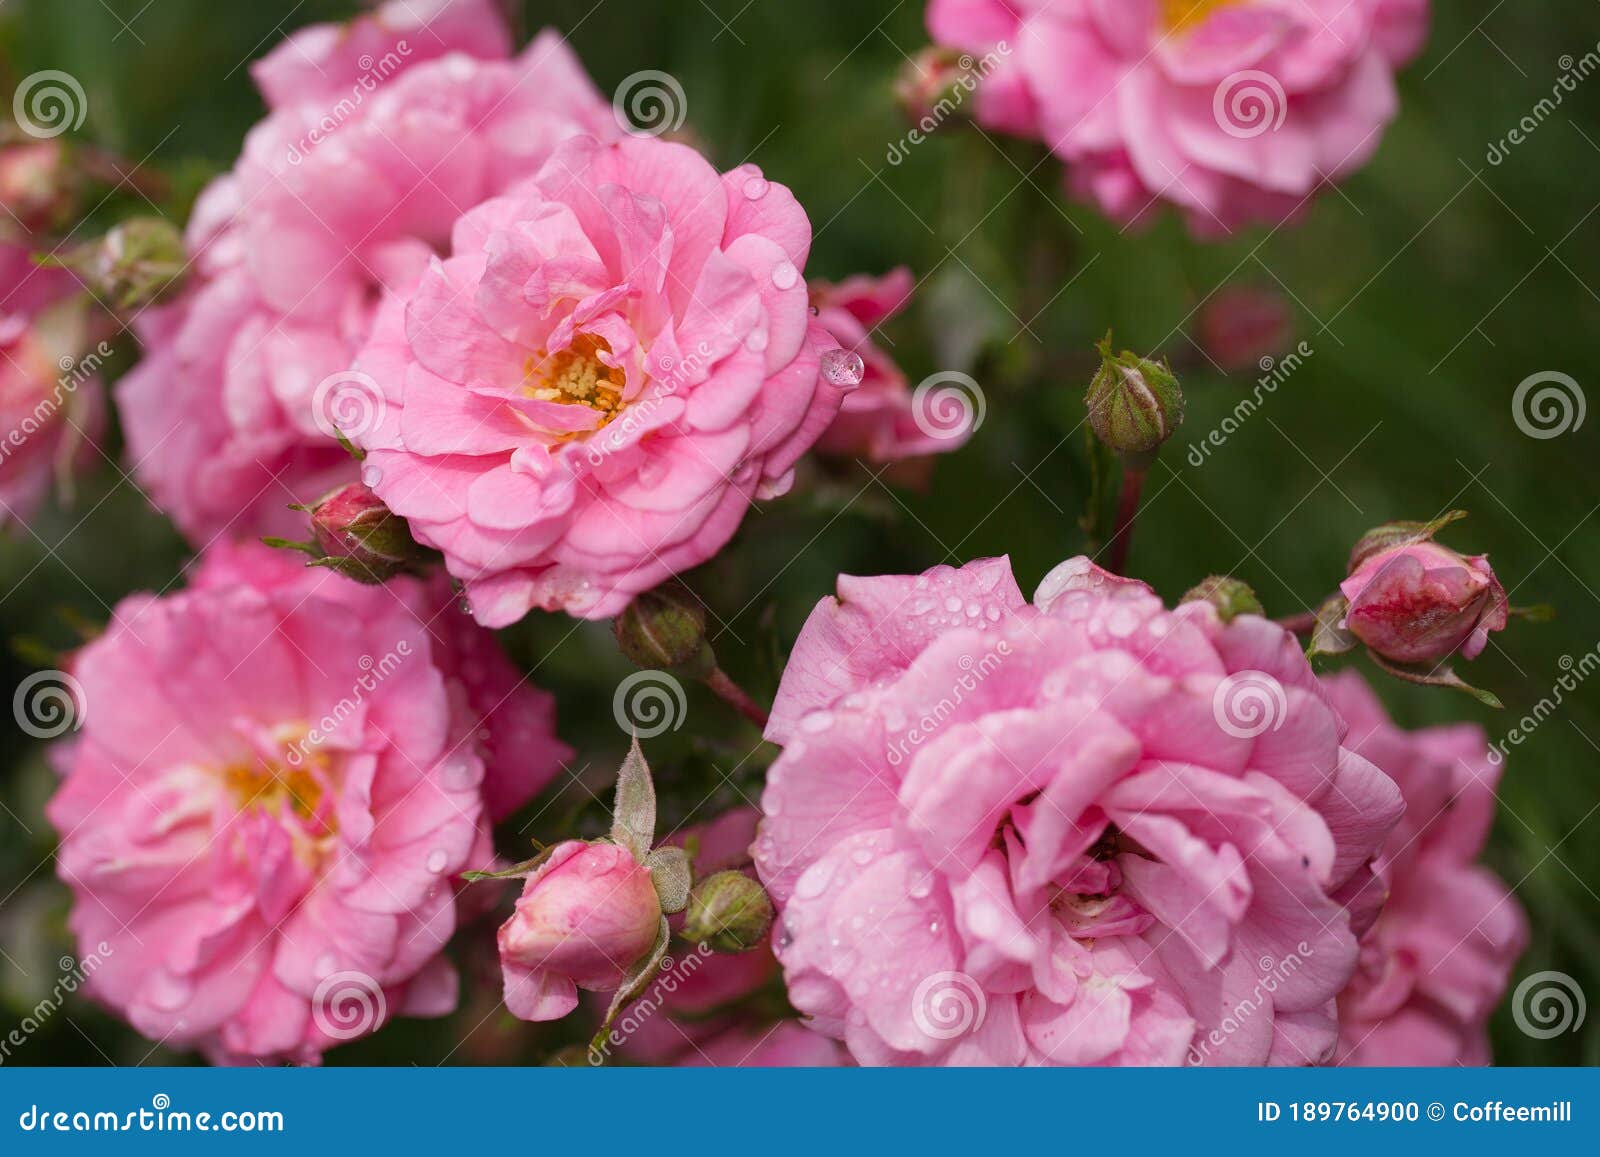 Delicate Flowering Shrub with Roses and Wild Rose Stock Photo - Image ...